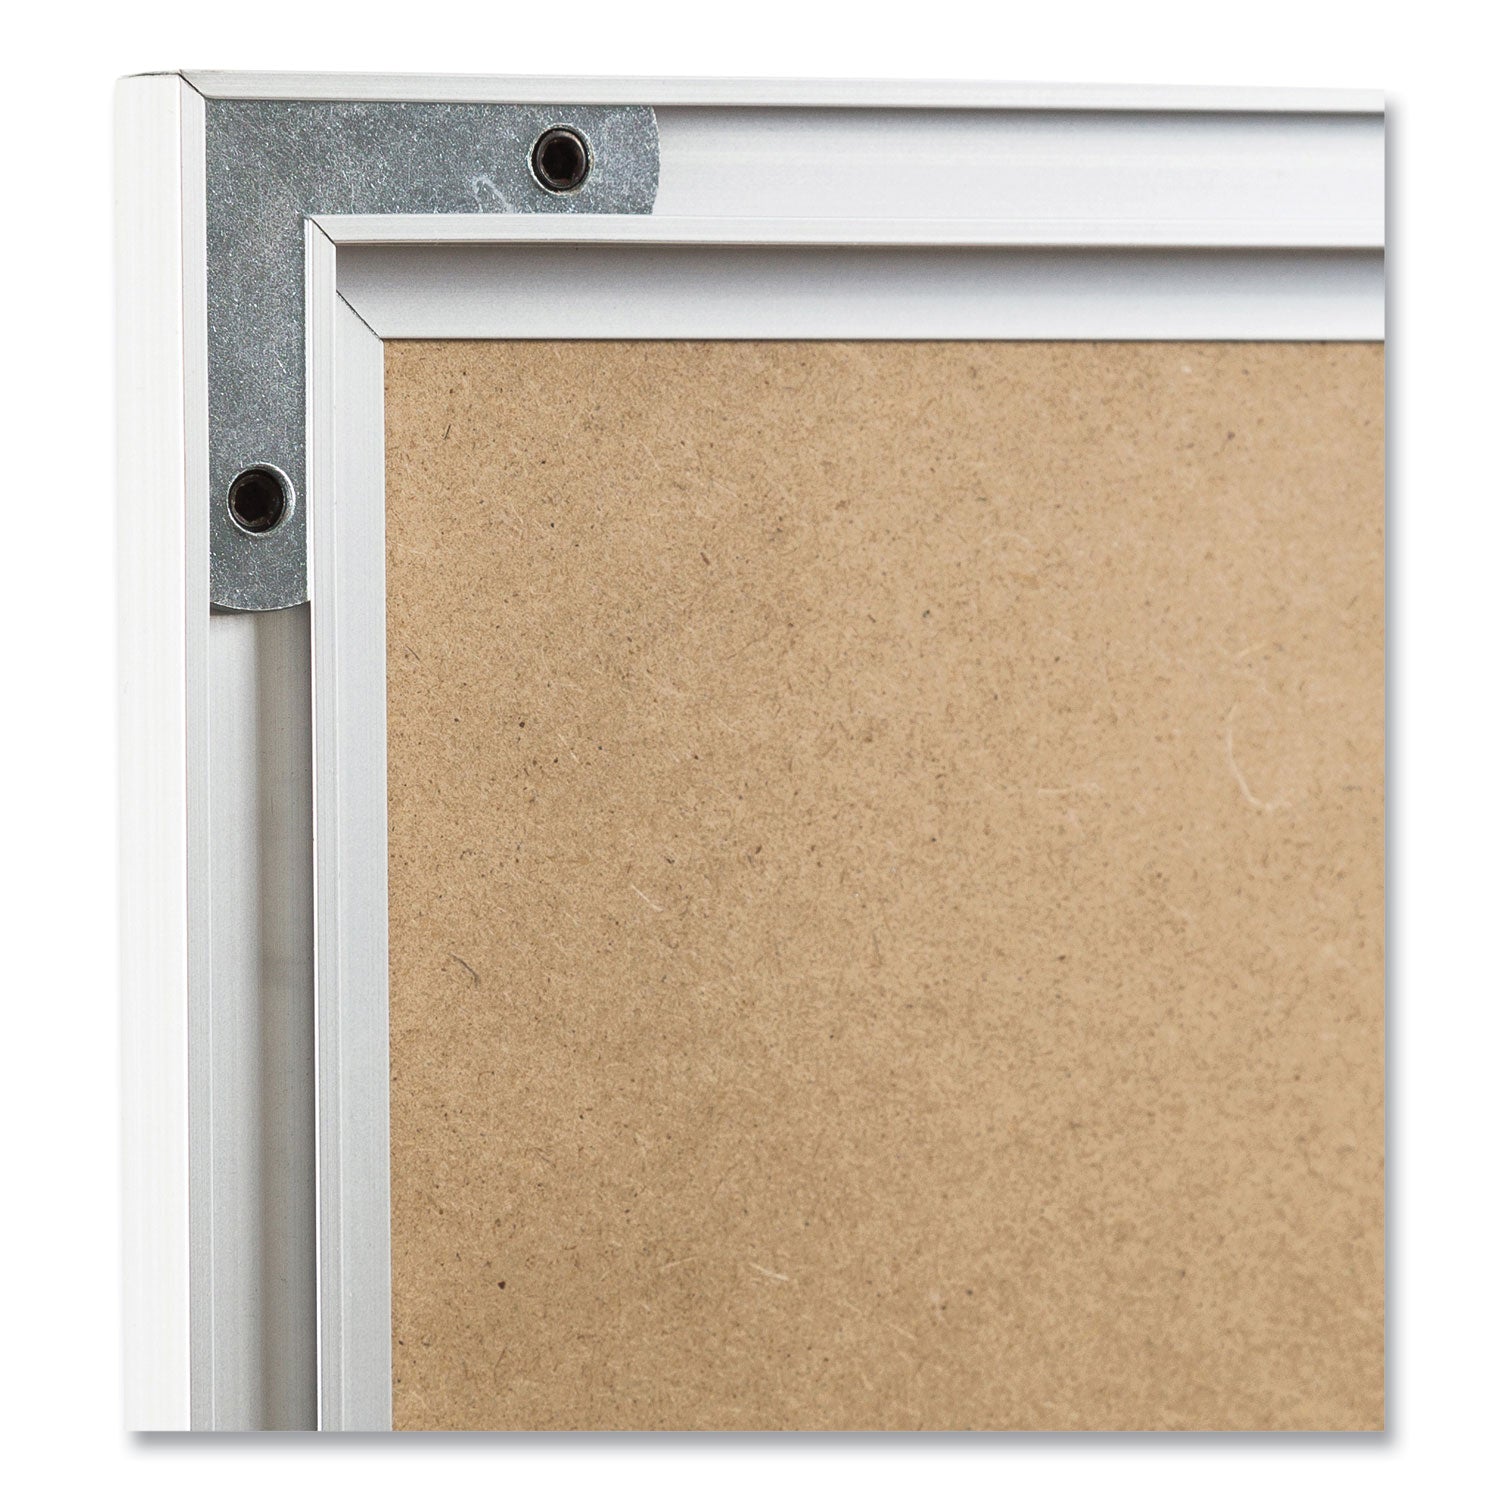 magnetic-dry-erase-board-with-aluminum-frame-23-x-17-white-surface-silver-frame_ubr070u0001 - 4